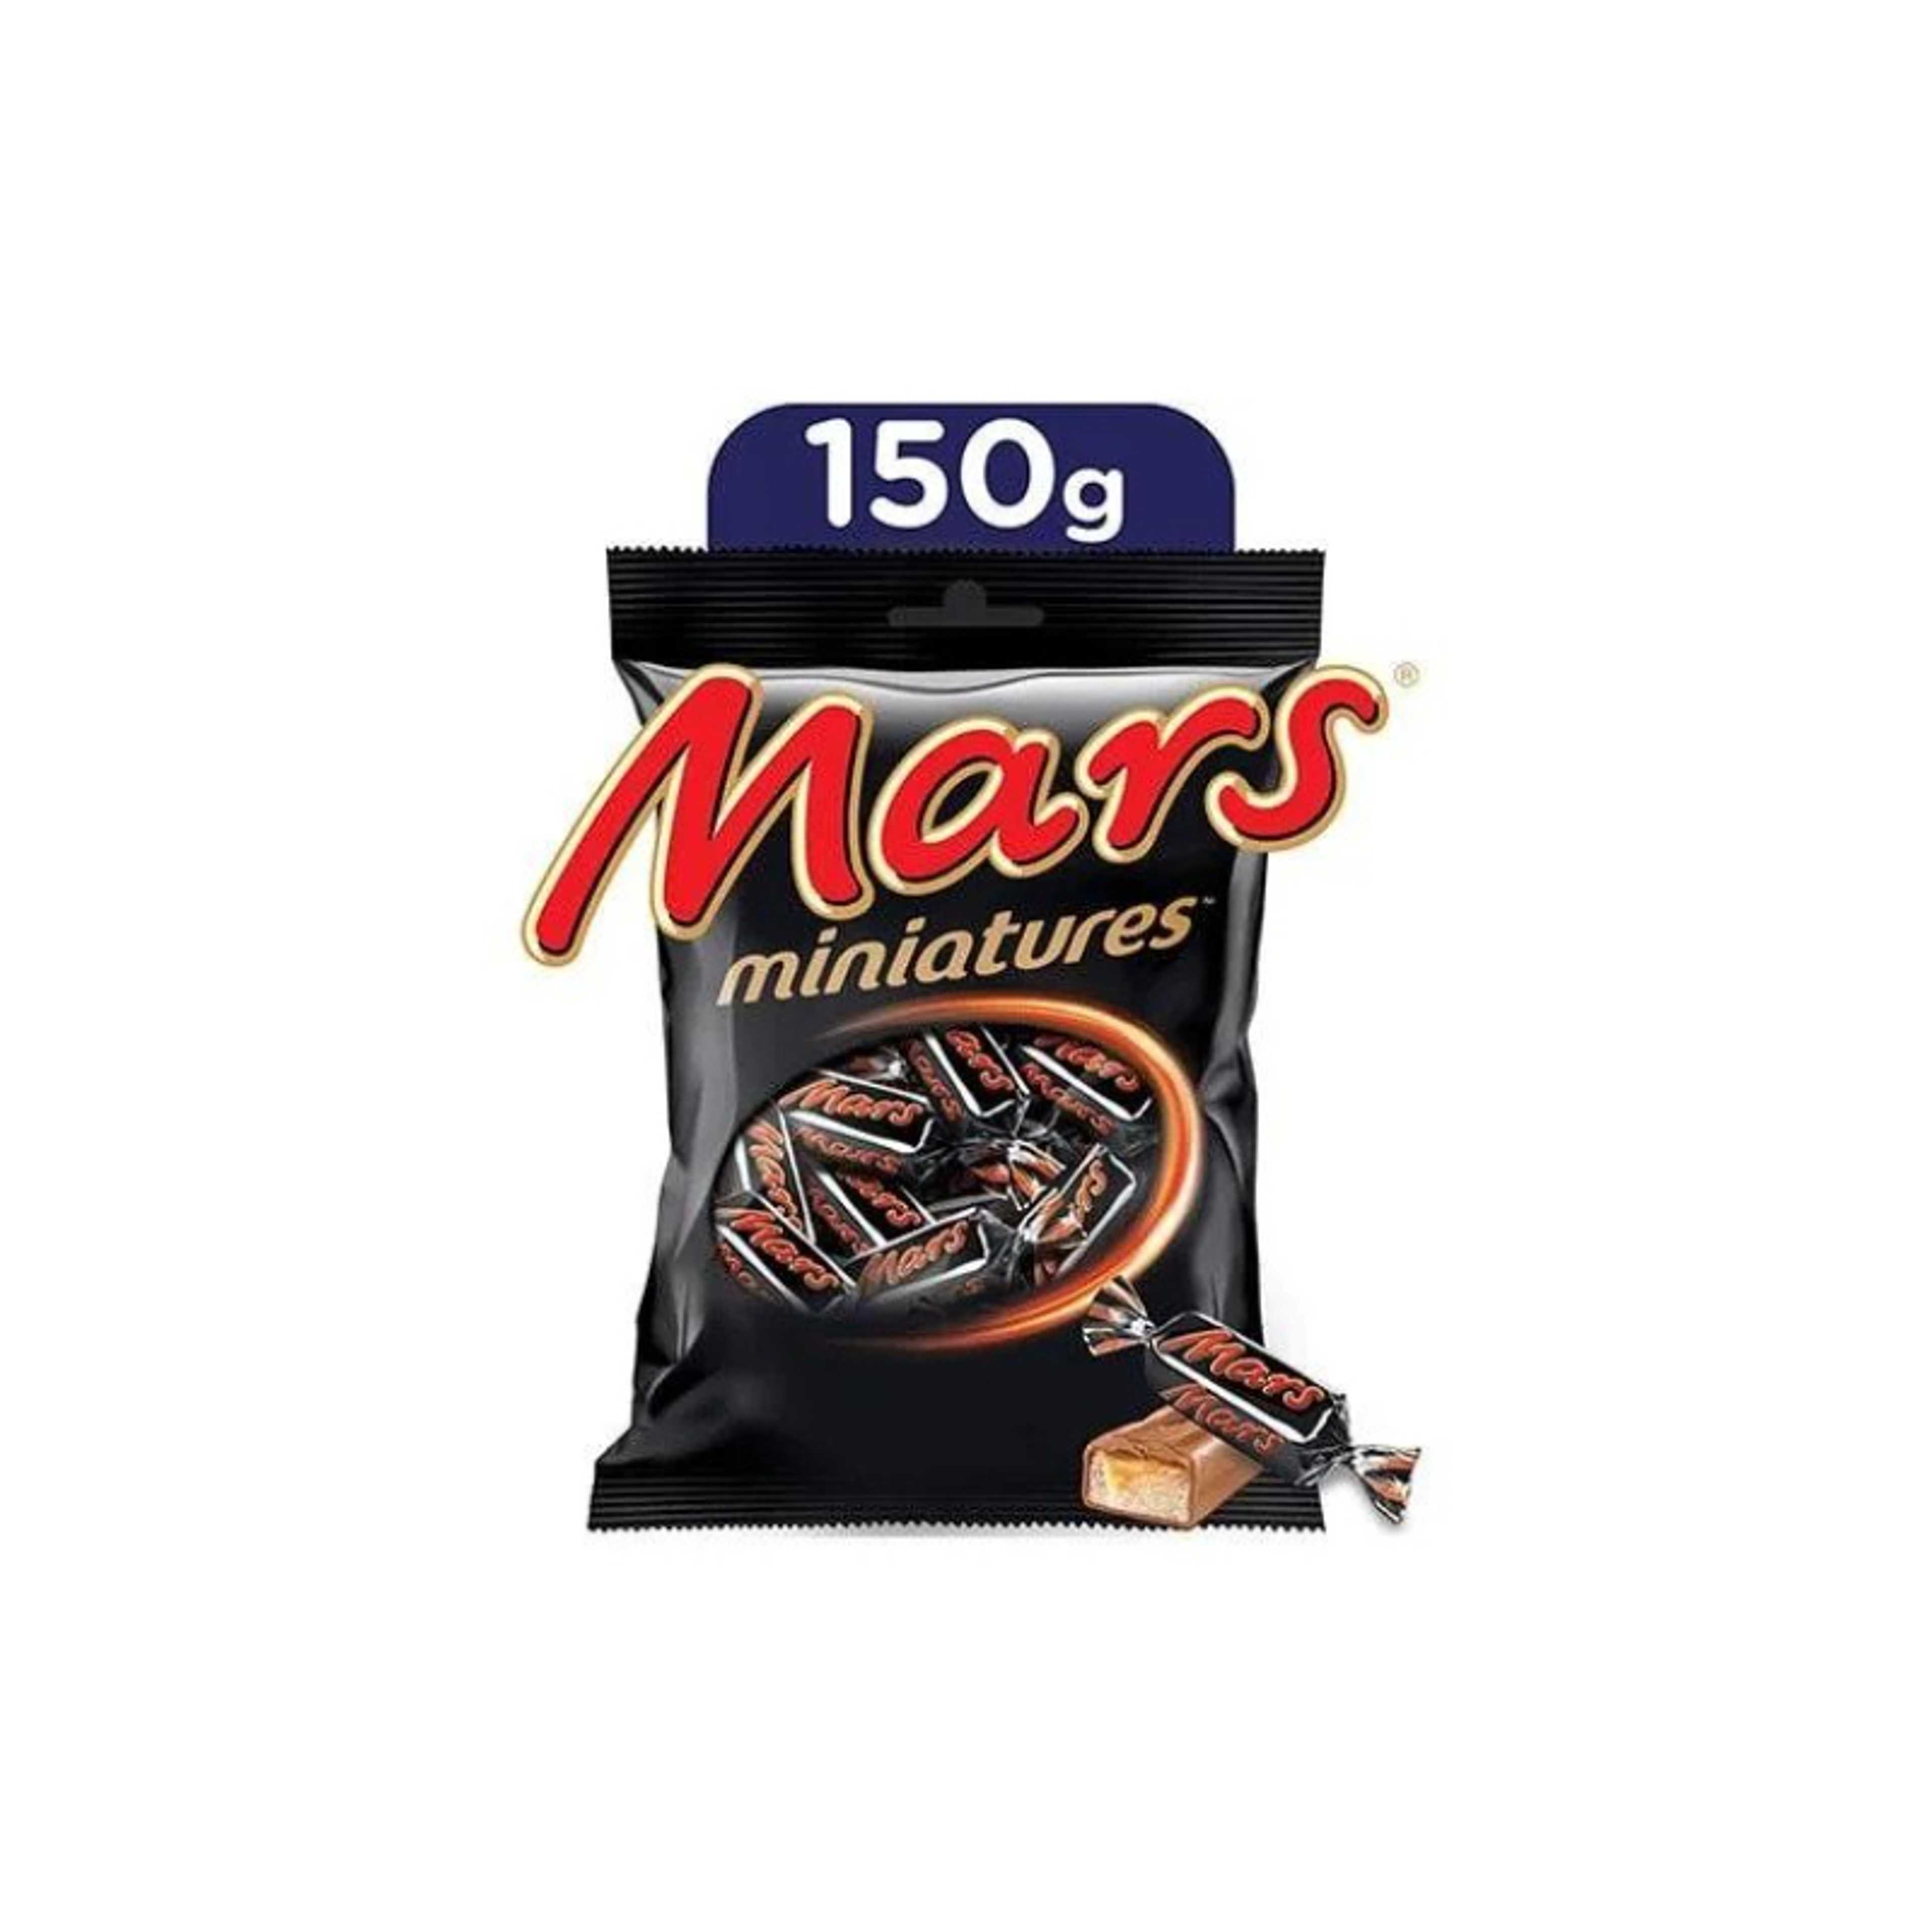 Mars Miniatures Chocolate Pouch 150gm